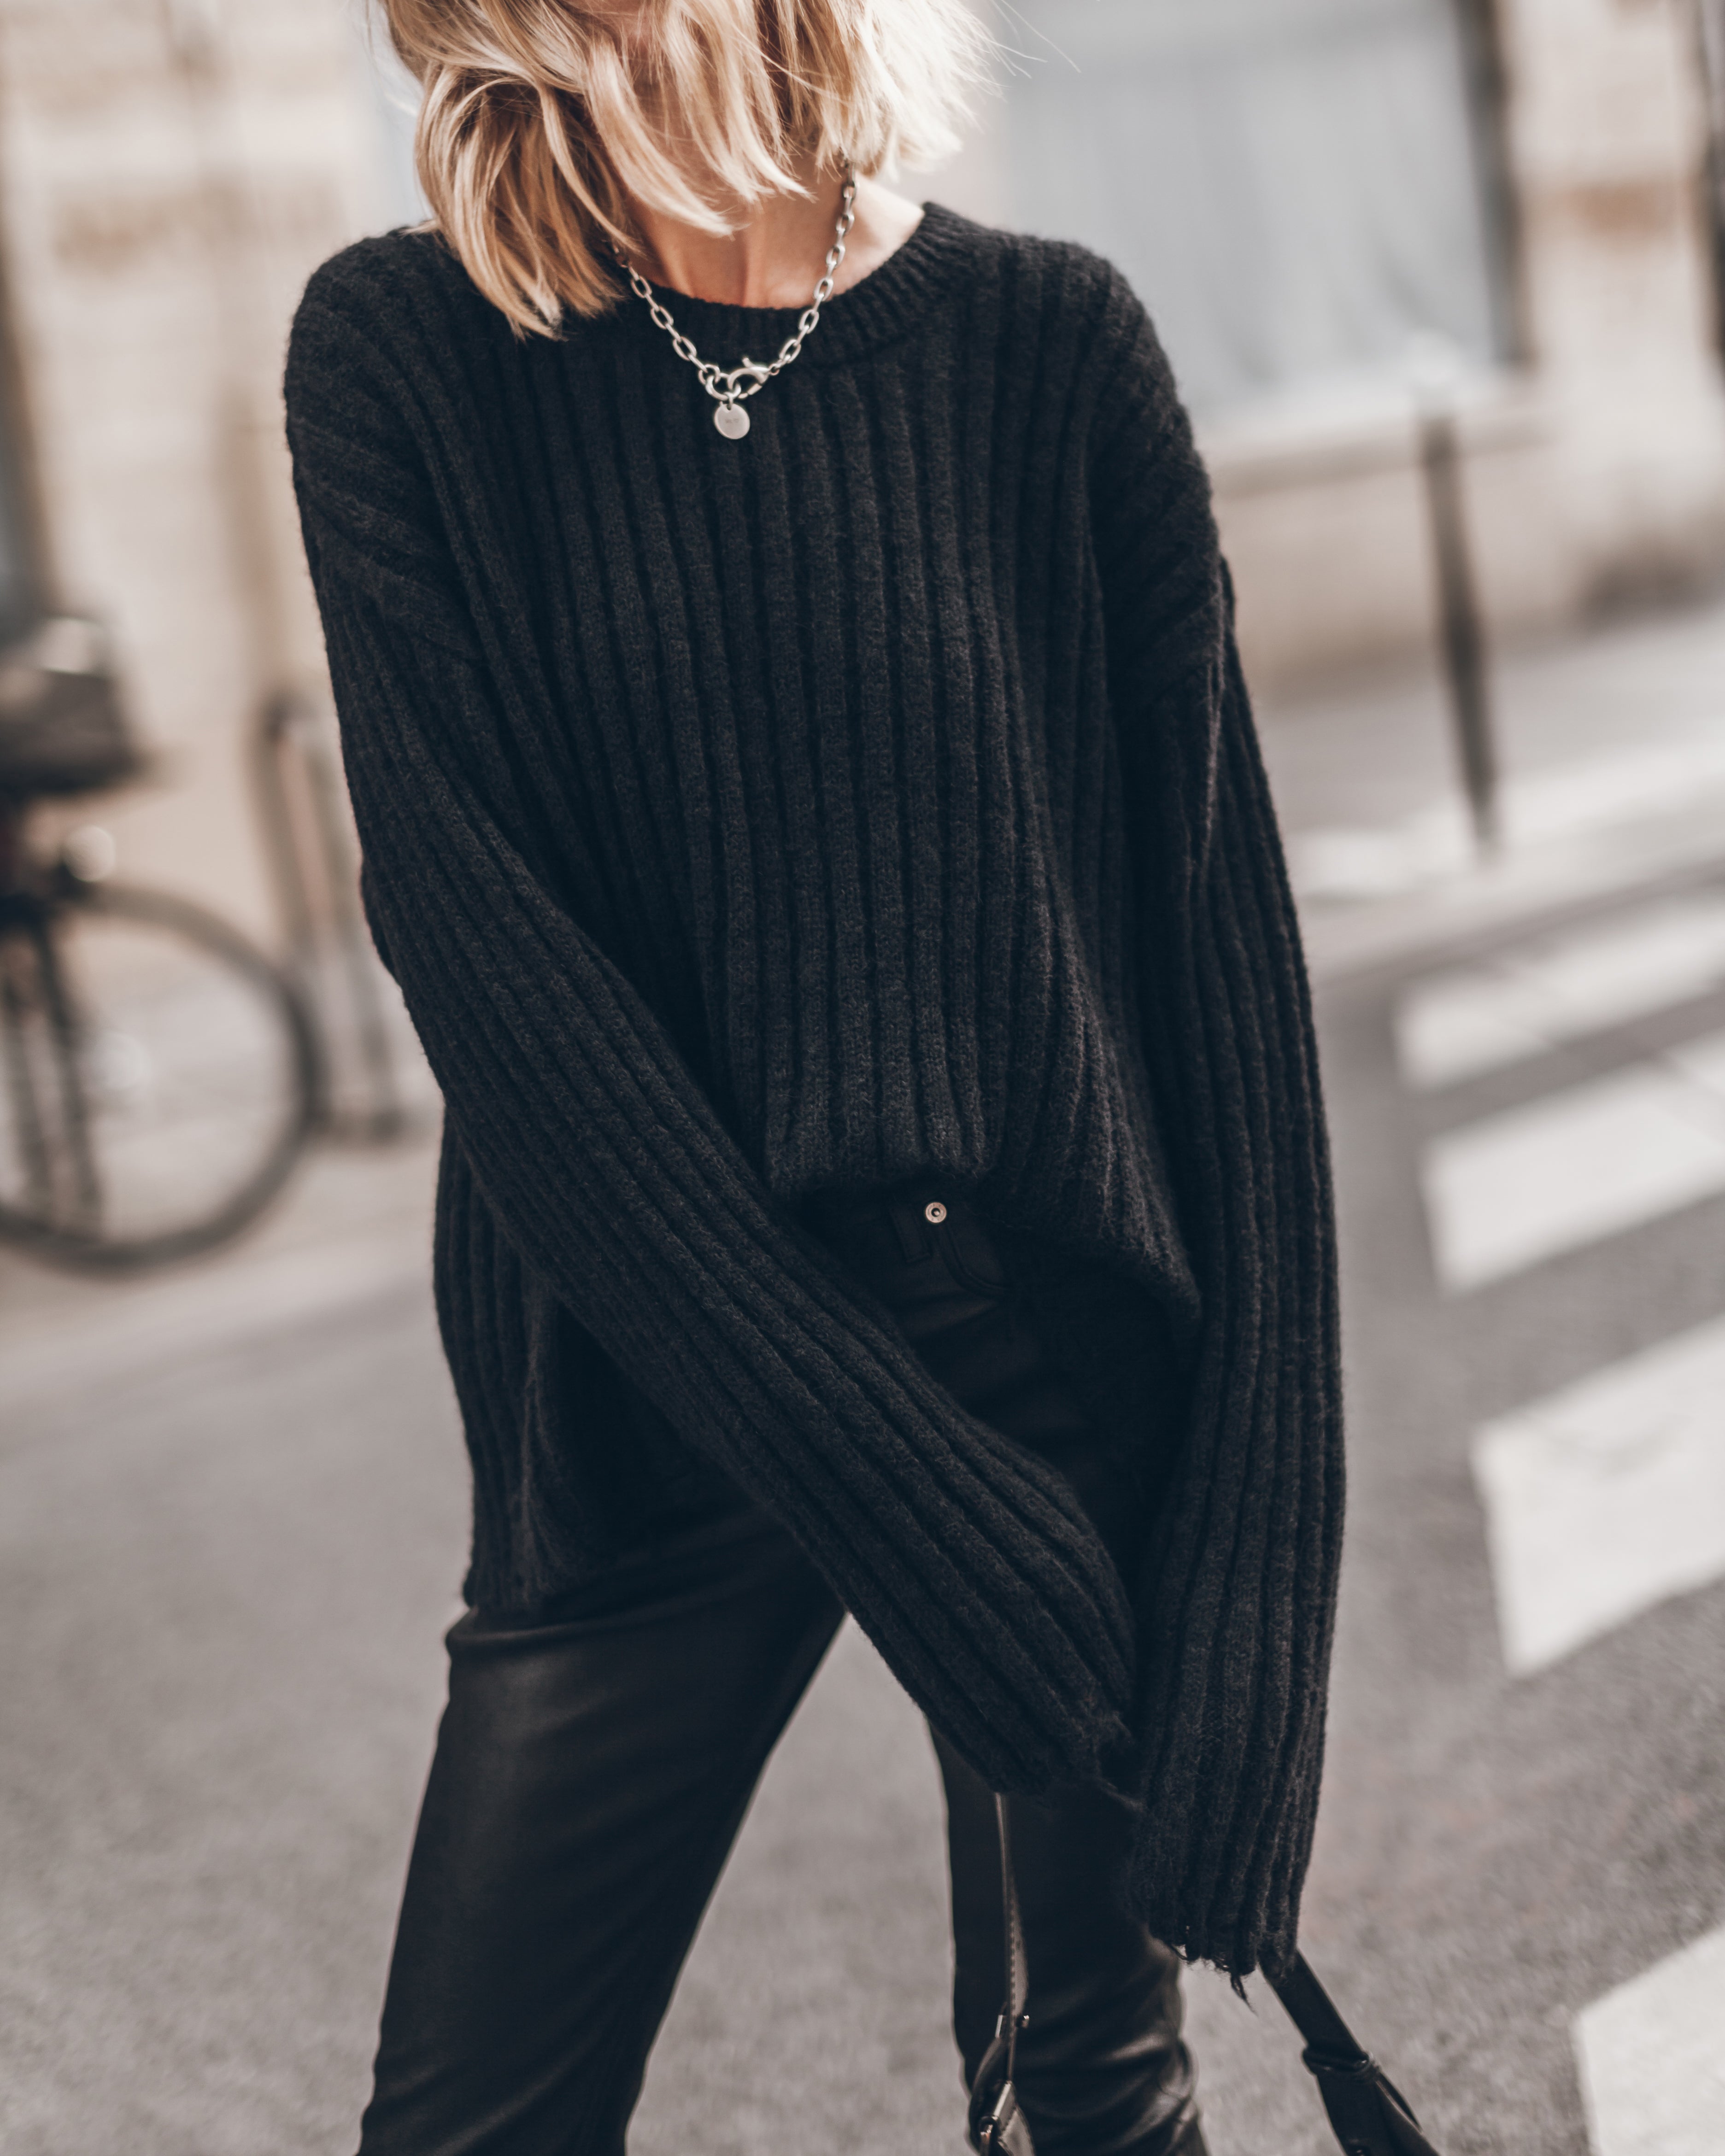 The Black Destroyed Knitted Sweater